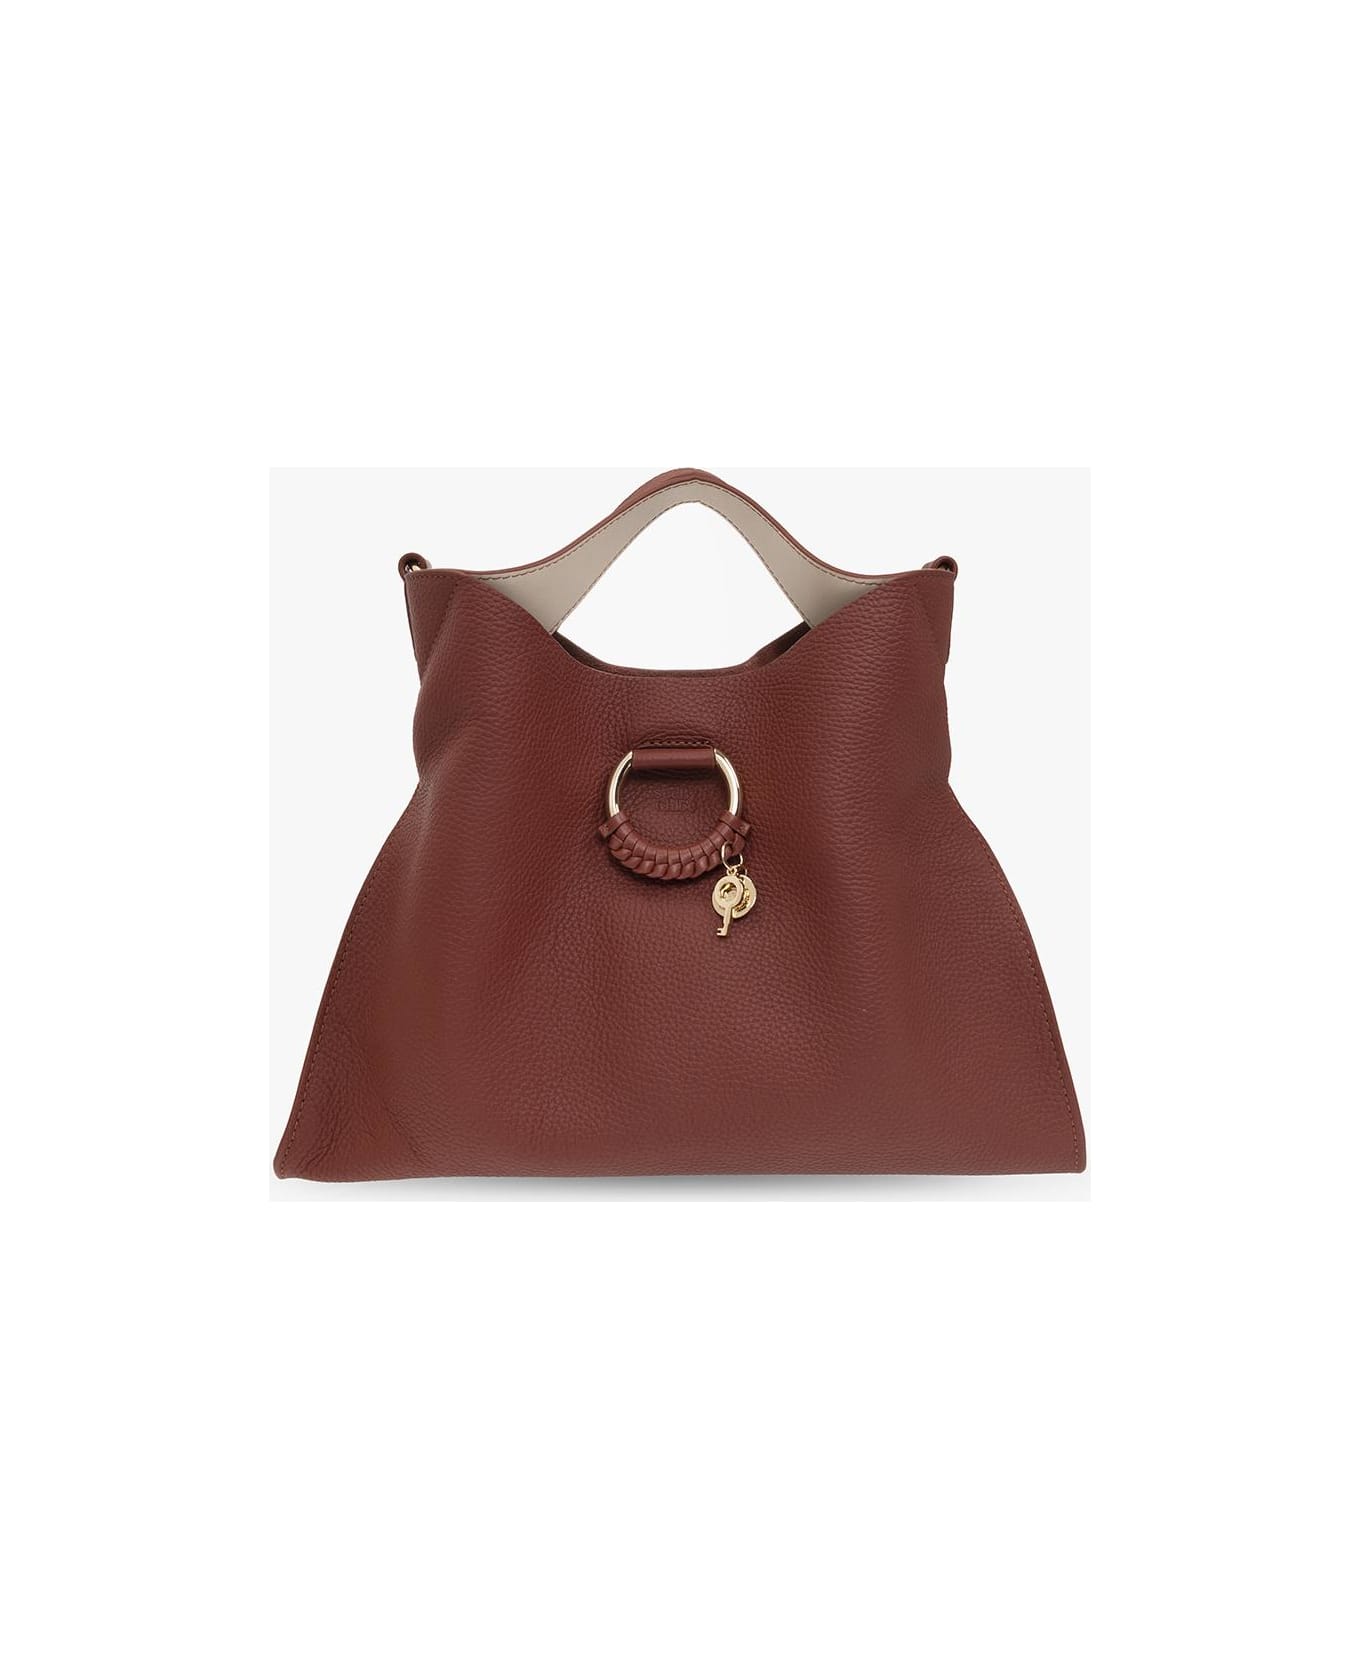 See by Chloé 'joan Small' Shoulder Bag - Marrone